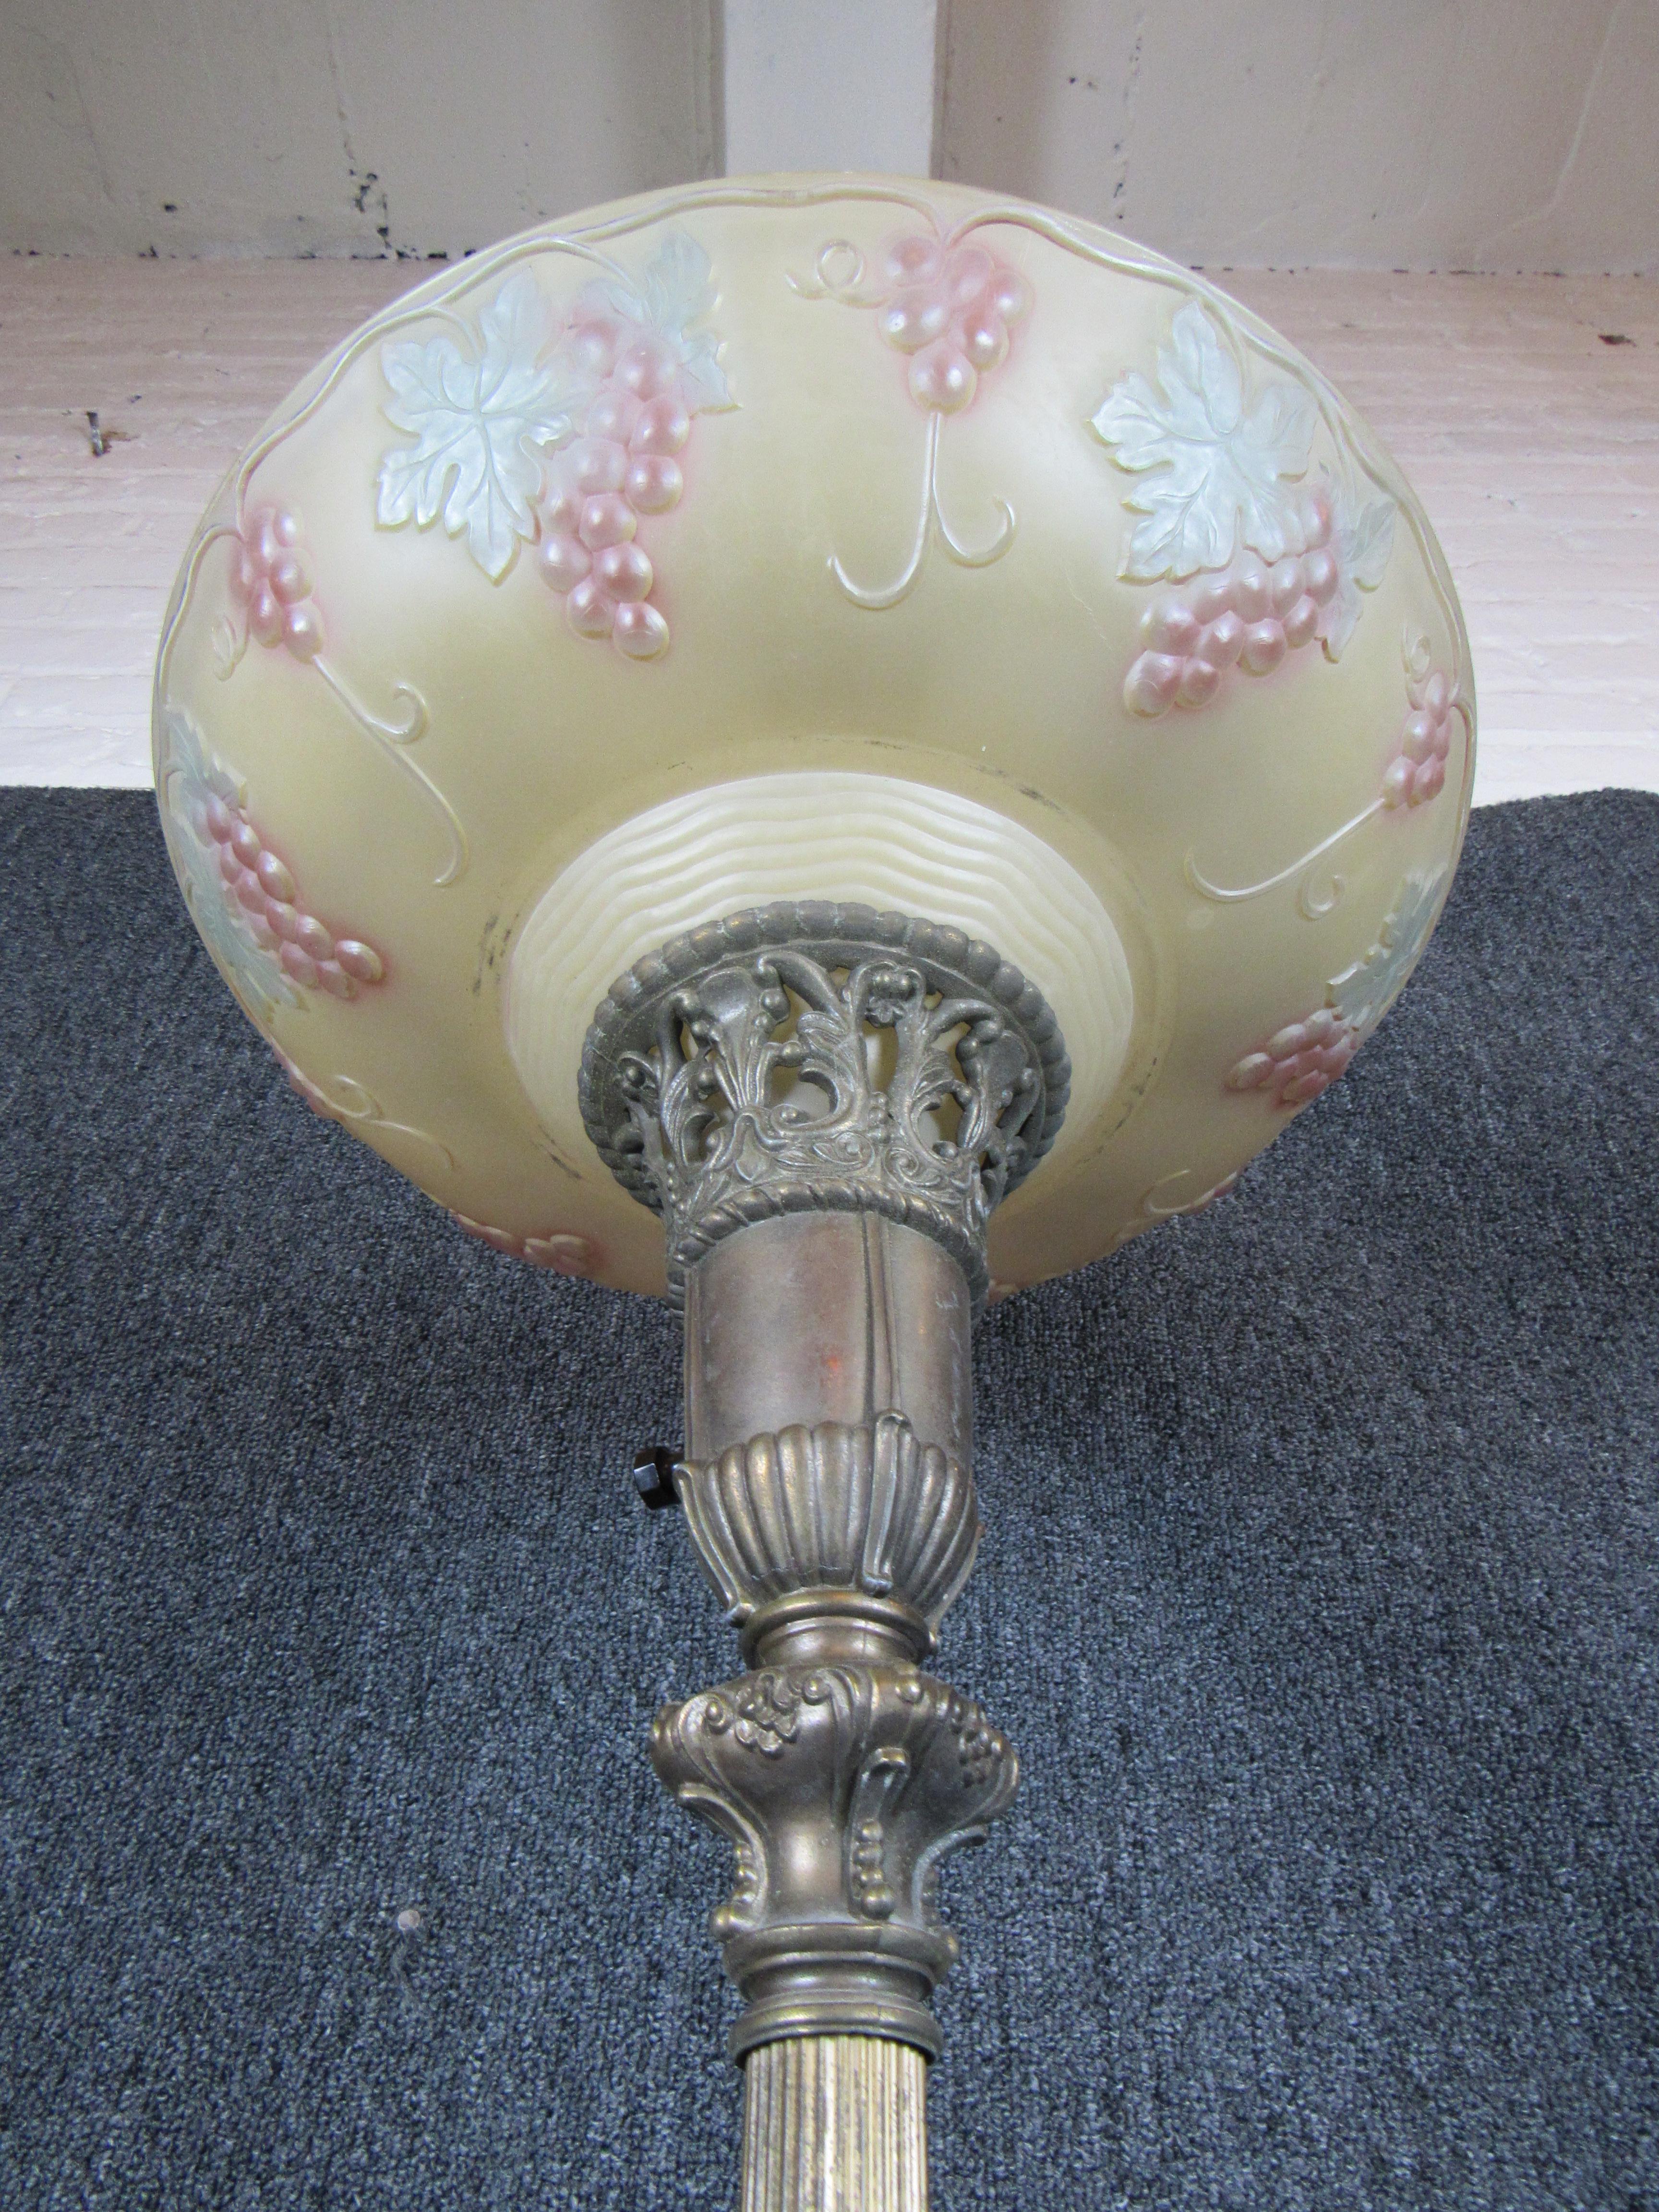 Bring an elegant light into any space with this stunning antique torchiere lamp. A lovely marble and brass base features the timeless beauty of Art Nouveau adornments while it's blown glass shade adds style day or night.